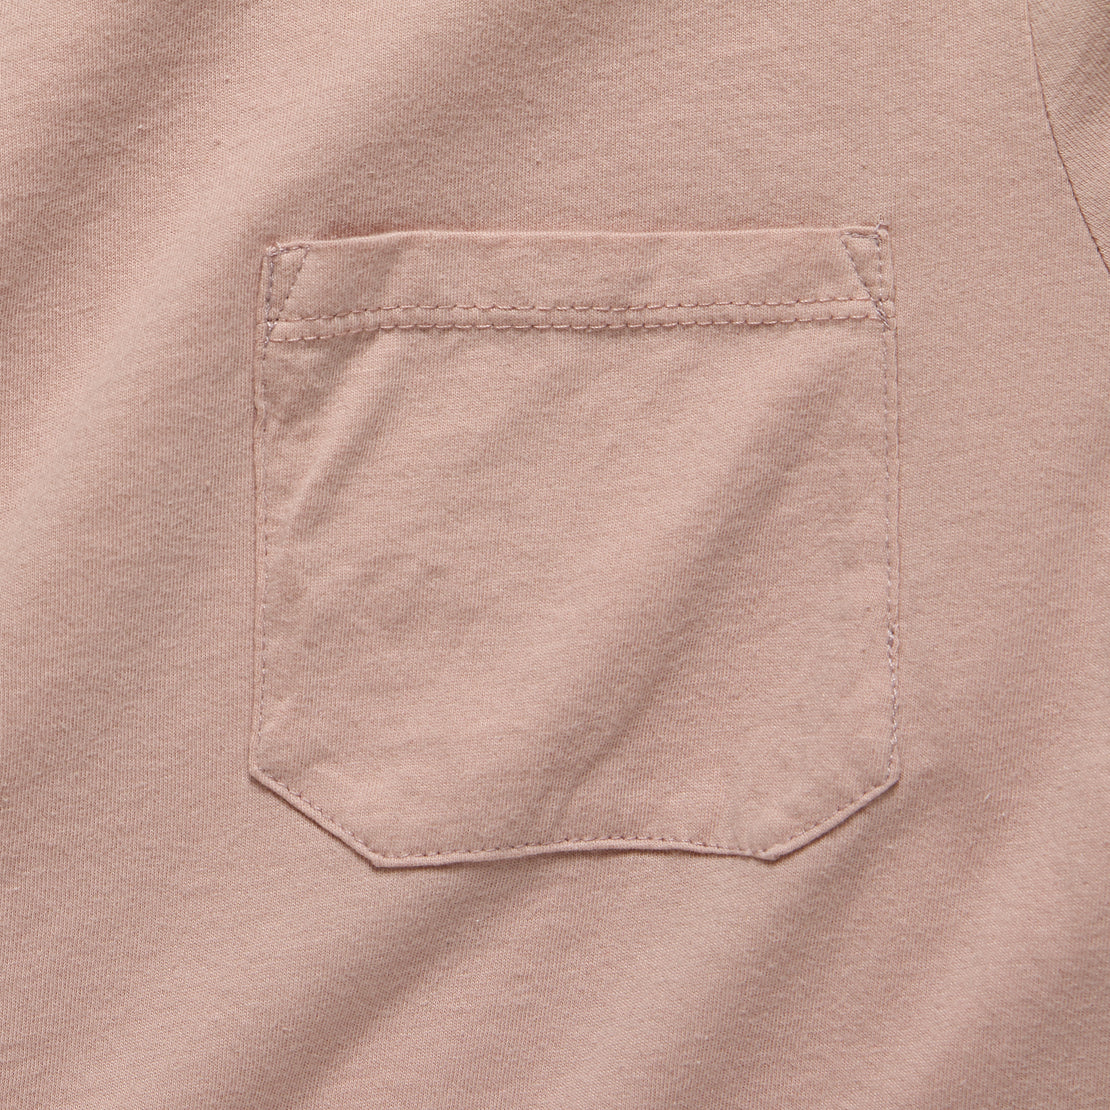 Boxy Crop Tee - Blush - Richer Poorer - STAG Provisions - W - Tops - S/S Tee